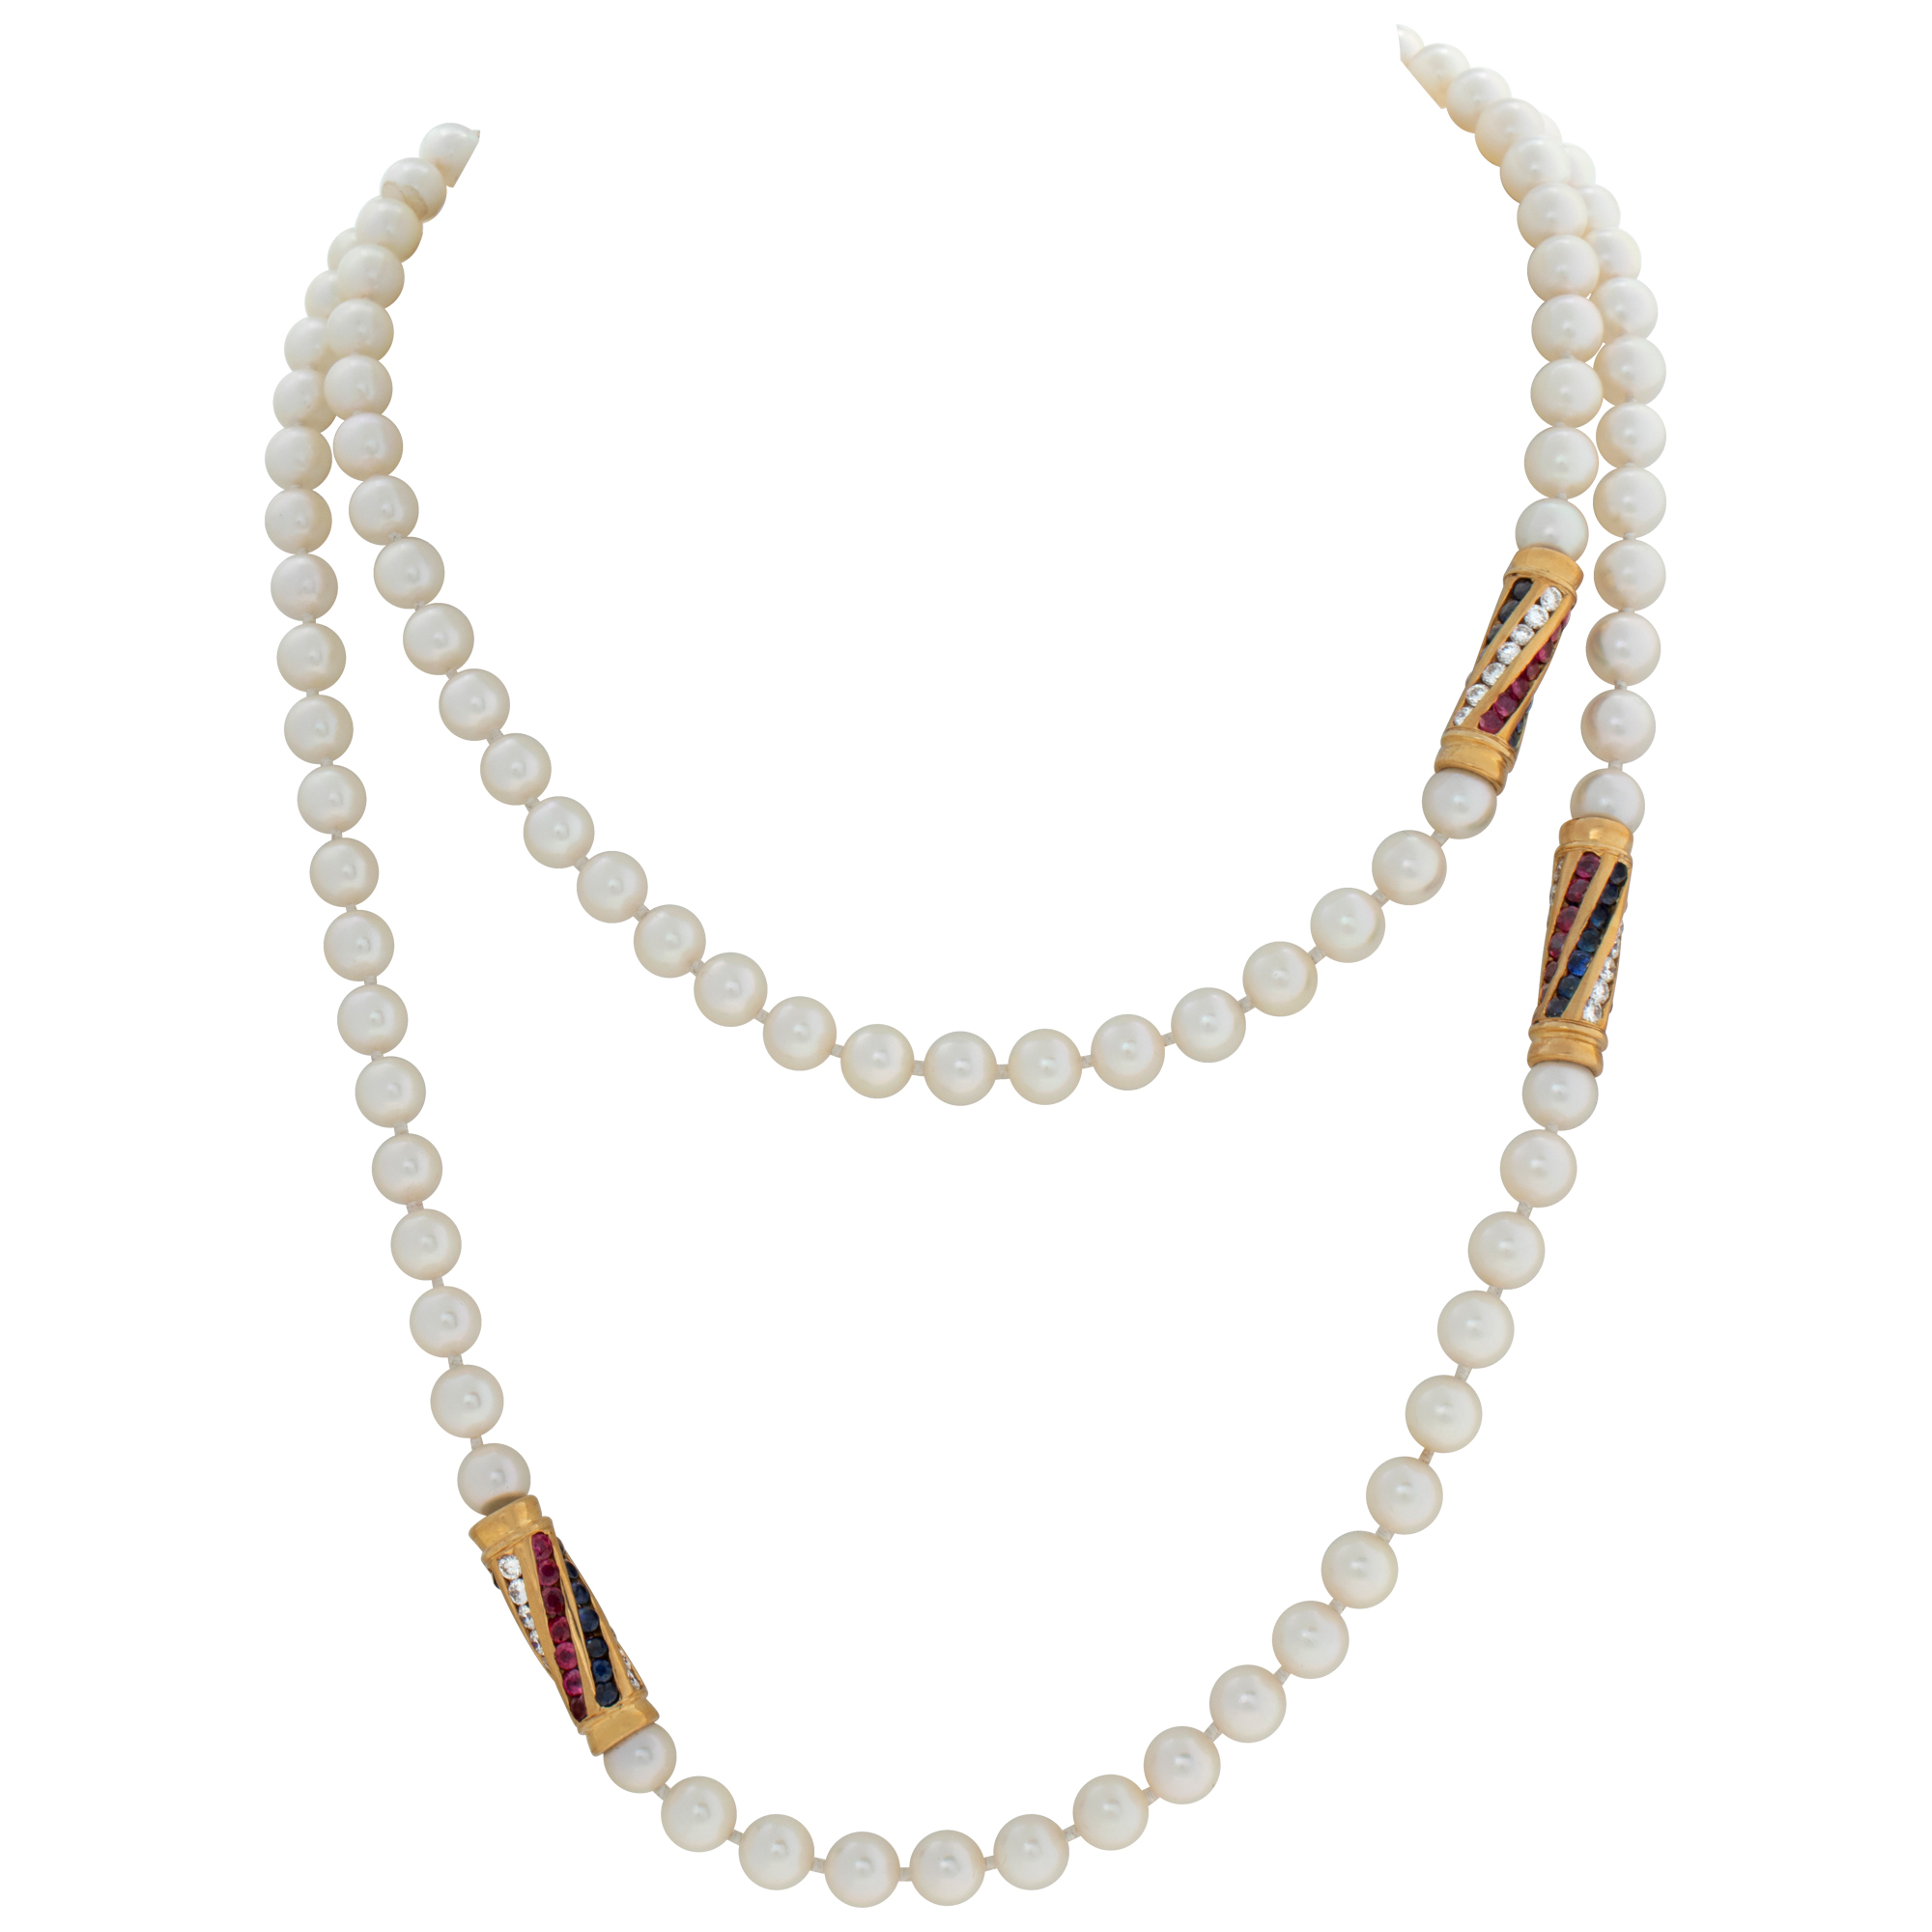 Opera length (36 inches) 6 x 6.5mm Akoya pearls necklace with four gold stations swirling with diamonds, rubies and sapphires set in 18K yellow gold